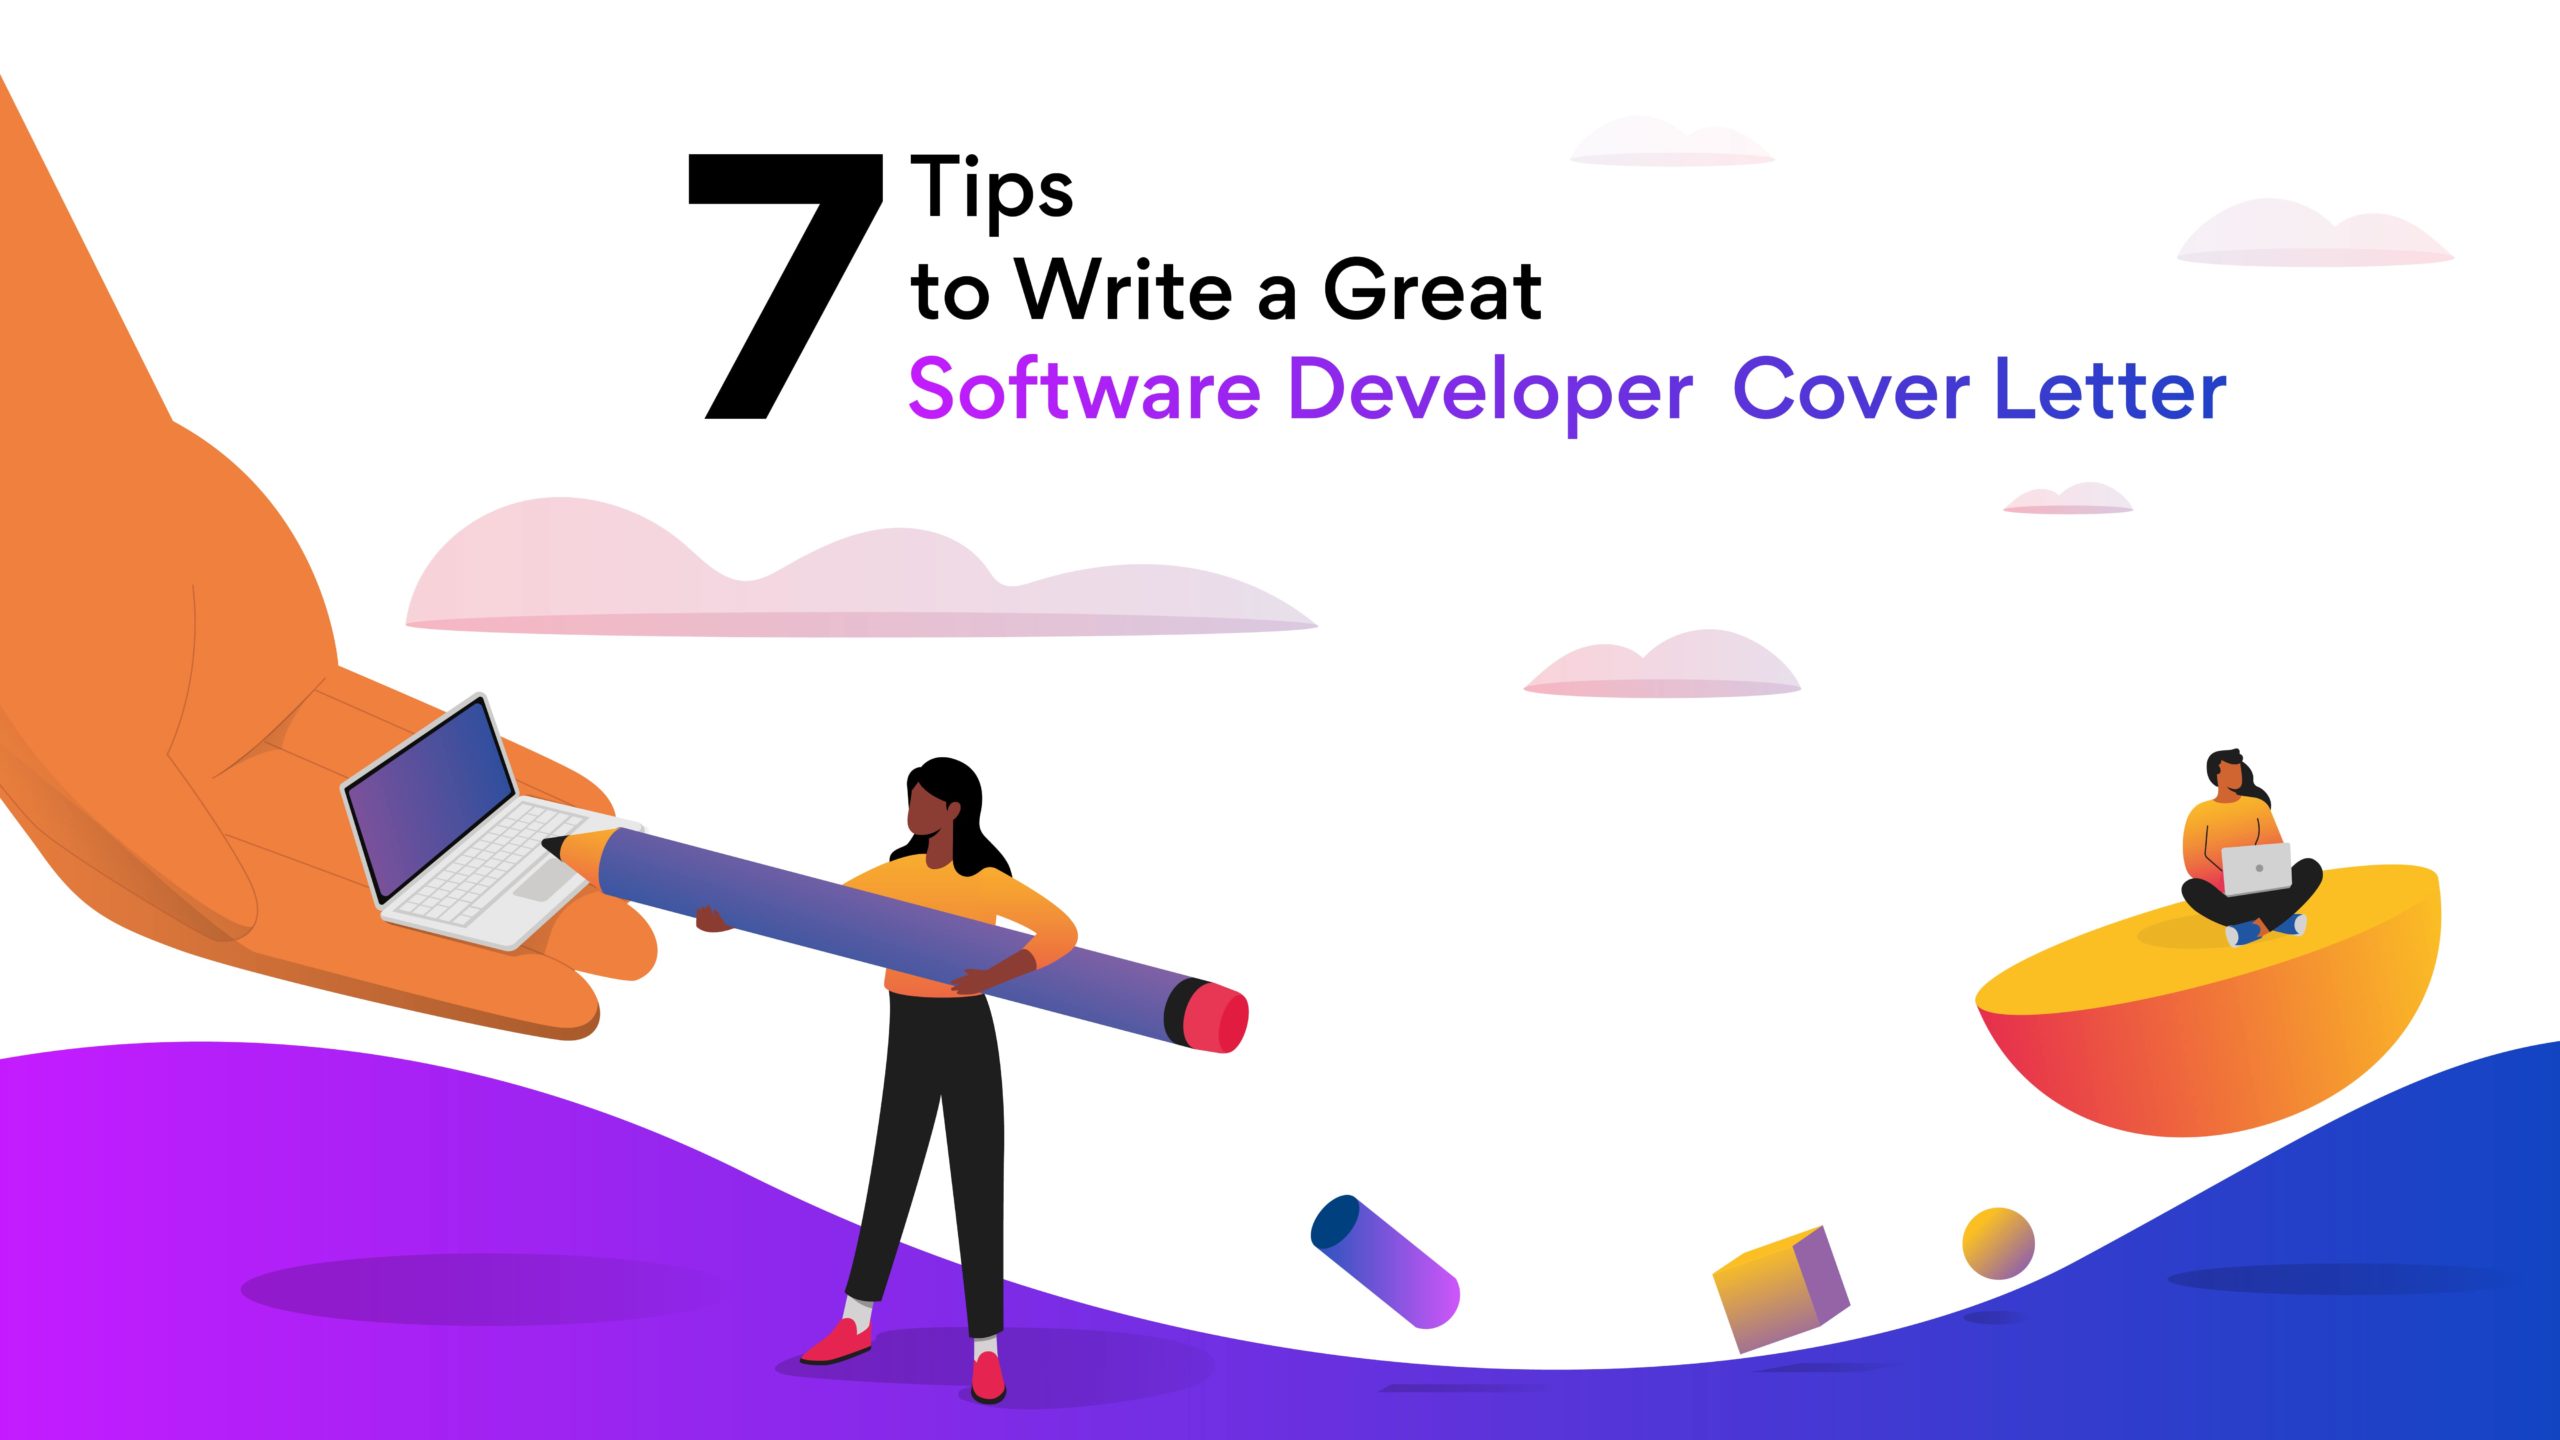 Tips to improve your software developer cover letter